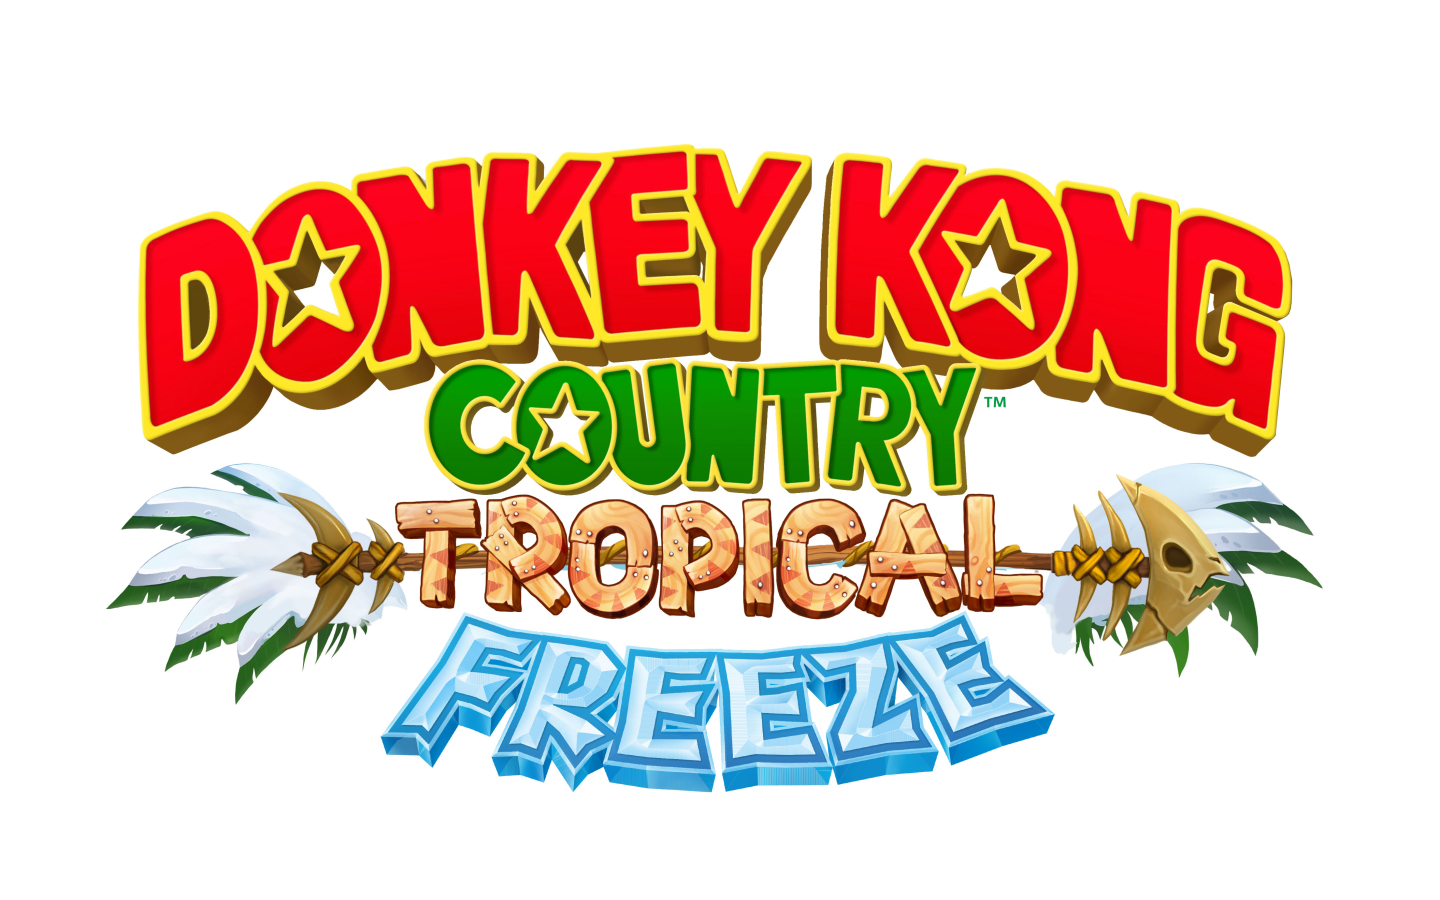 download dk country tropical freeze